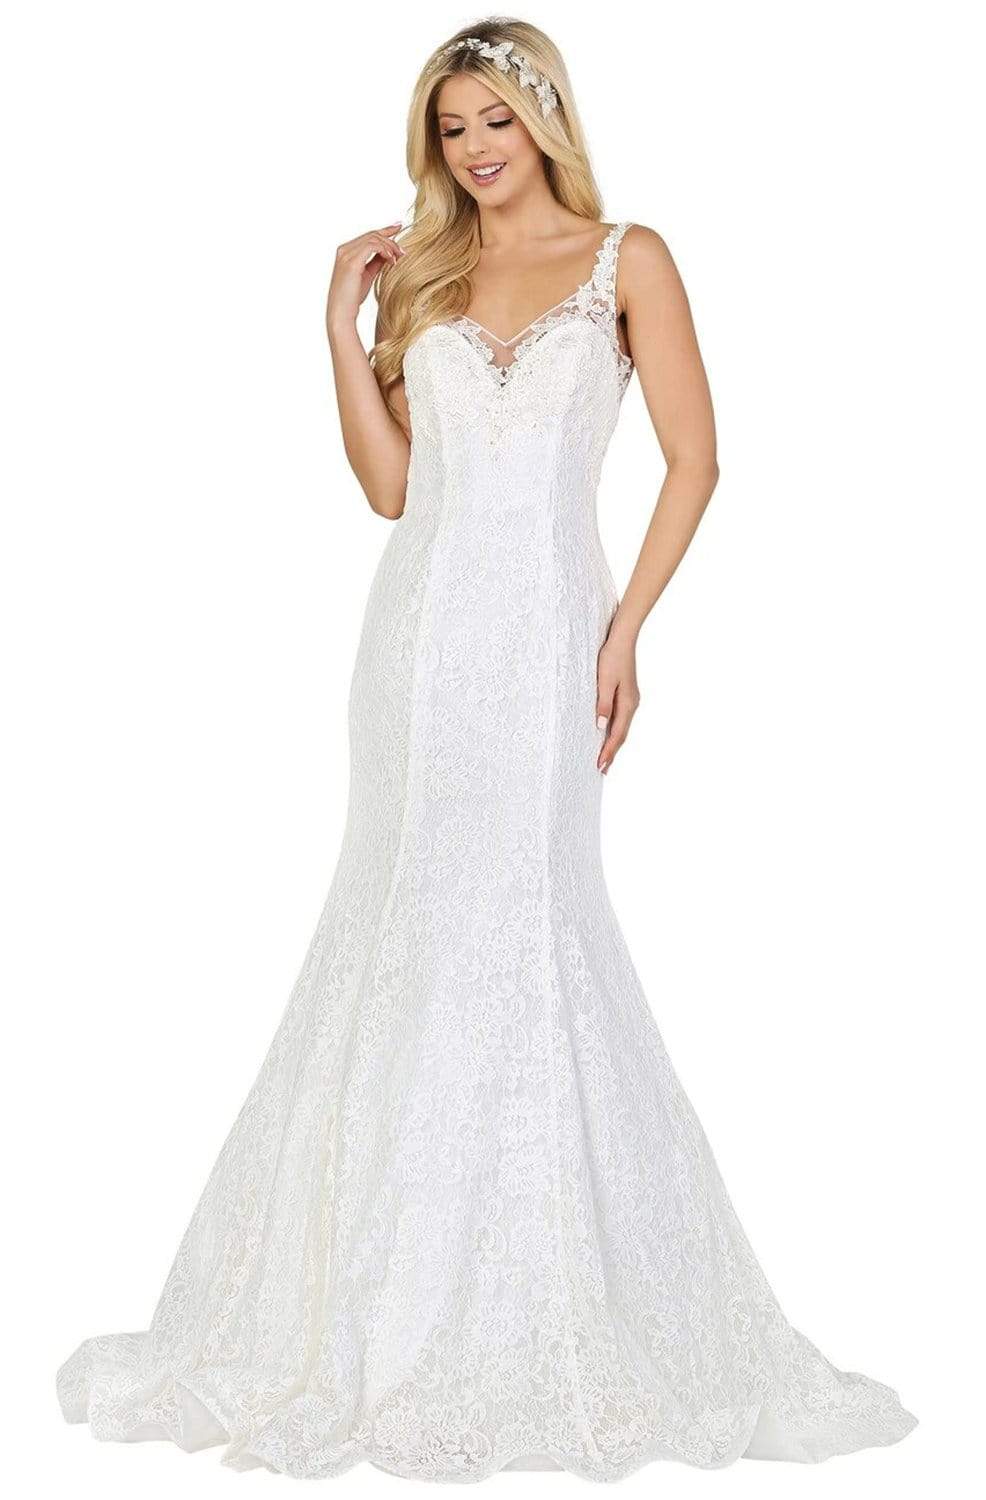 Dancing Queen - 151 Lace V-neck Mermaid Dress With Train
